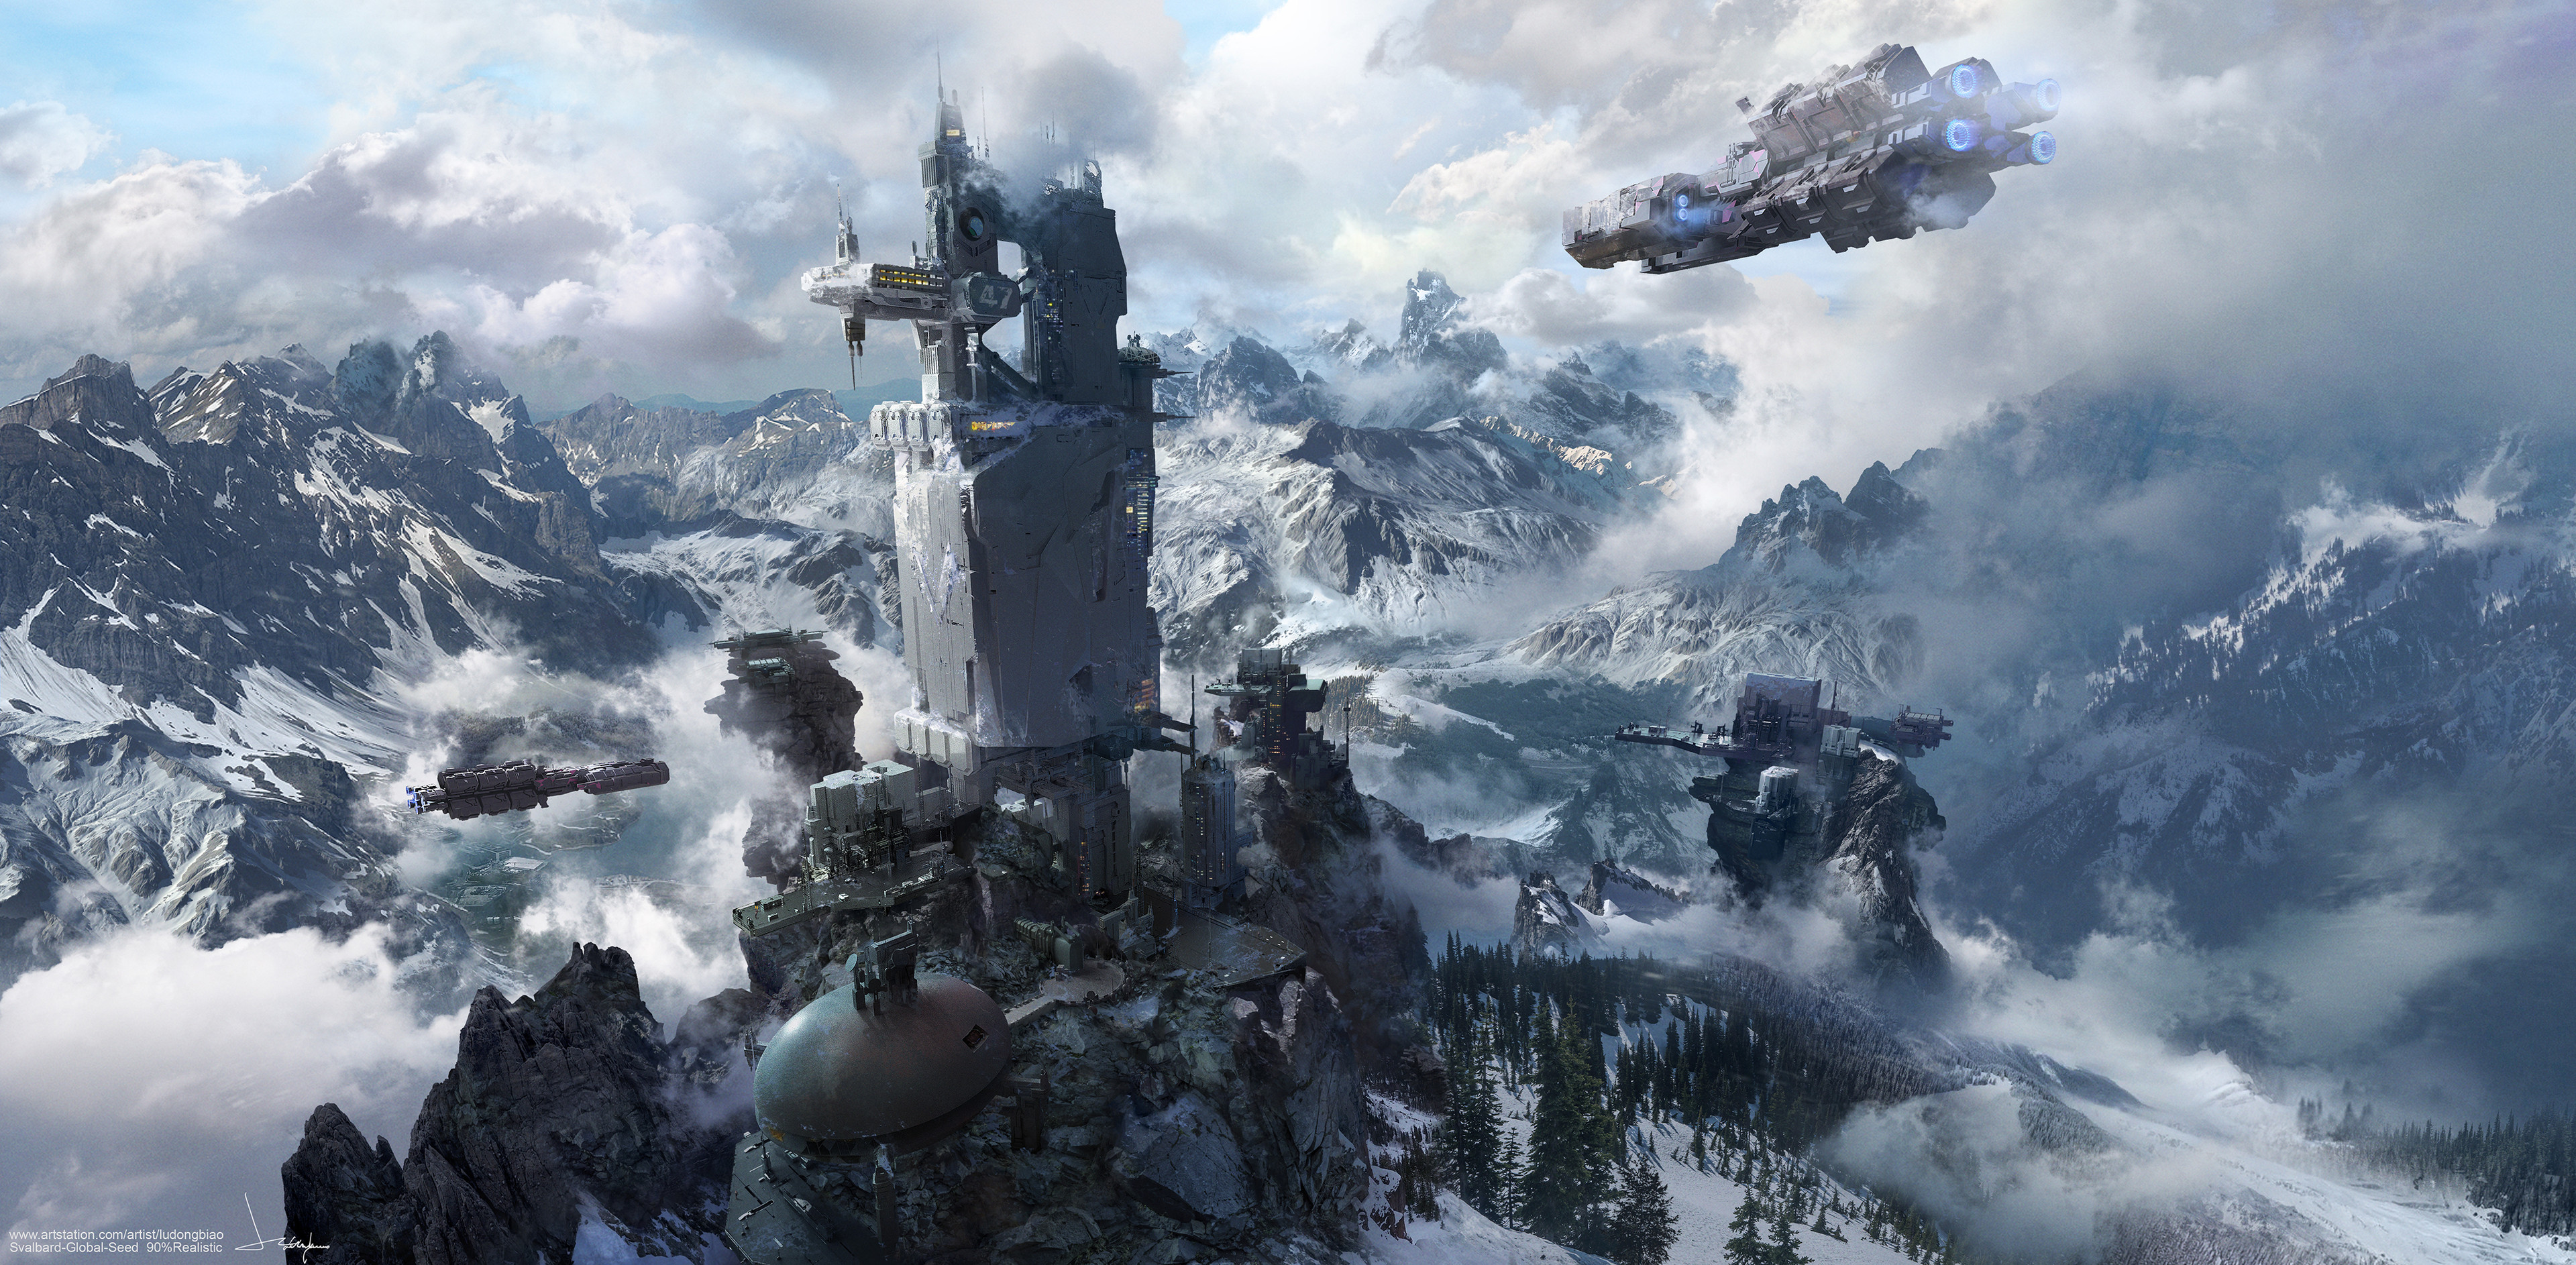 General 3840x1886 Dongbiao Lu drawing science fiction mountains snow clouds spaceship flying futuristic trees landscape digital art